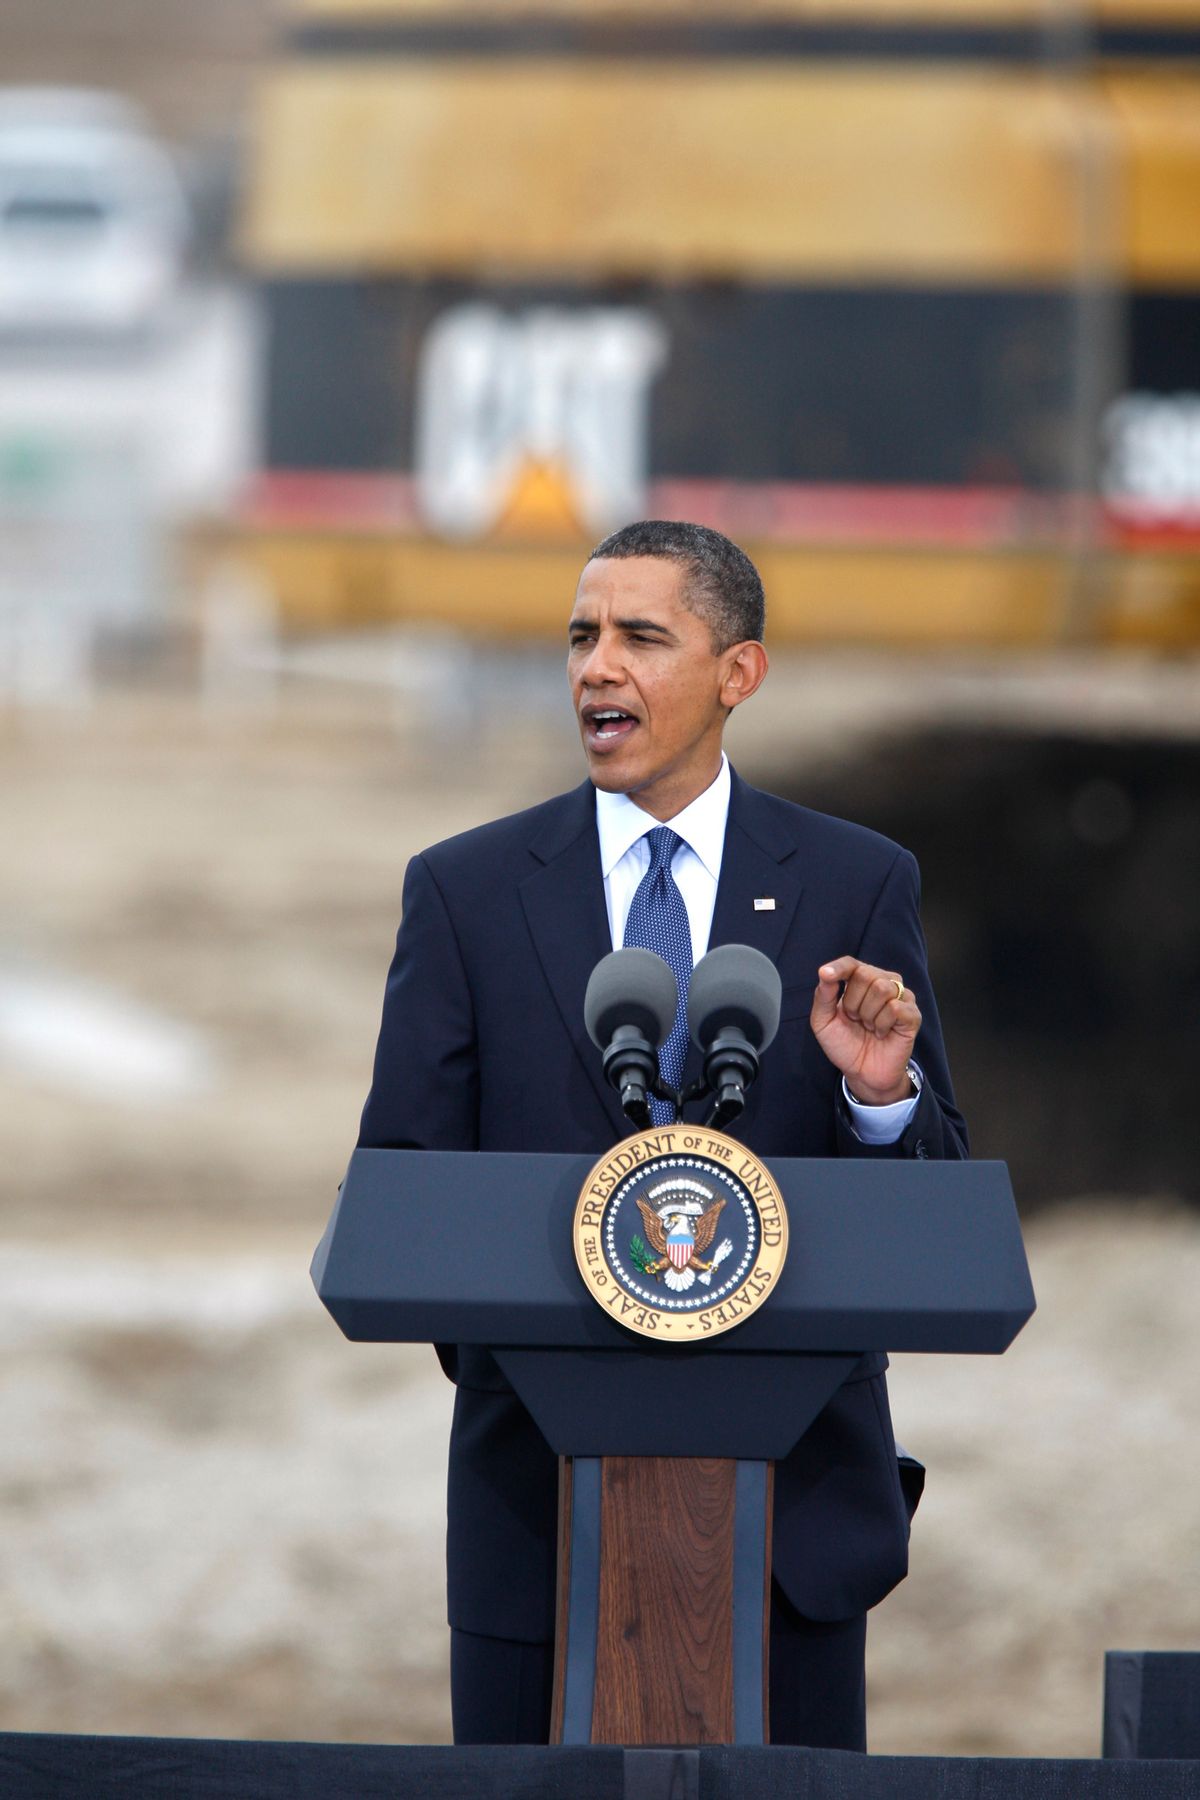 President Barack Obama speaks during a groundbreaking ceremony for the LG Chem plant that will manufacture advanced batteries for Chevrolet and Ford electric cars, Thursday, July 15, 2010, in Holland, Mich. (AP Photo/Carlos Osorio) (Carlos Osorio)